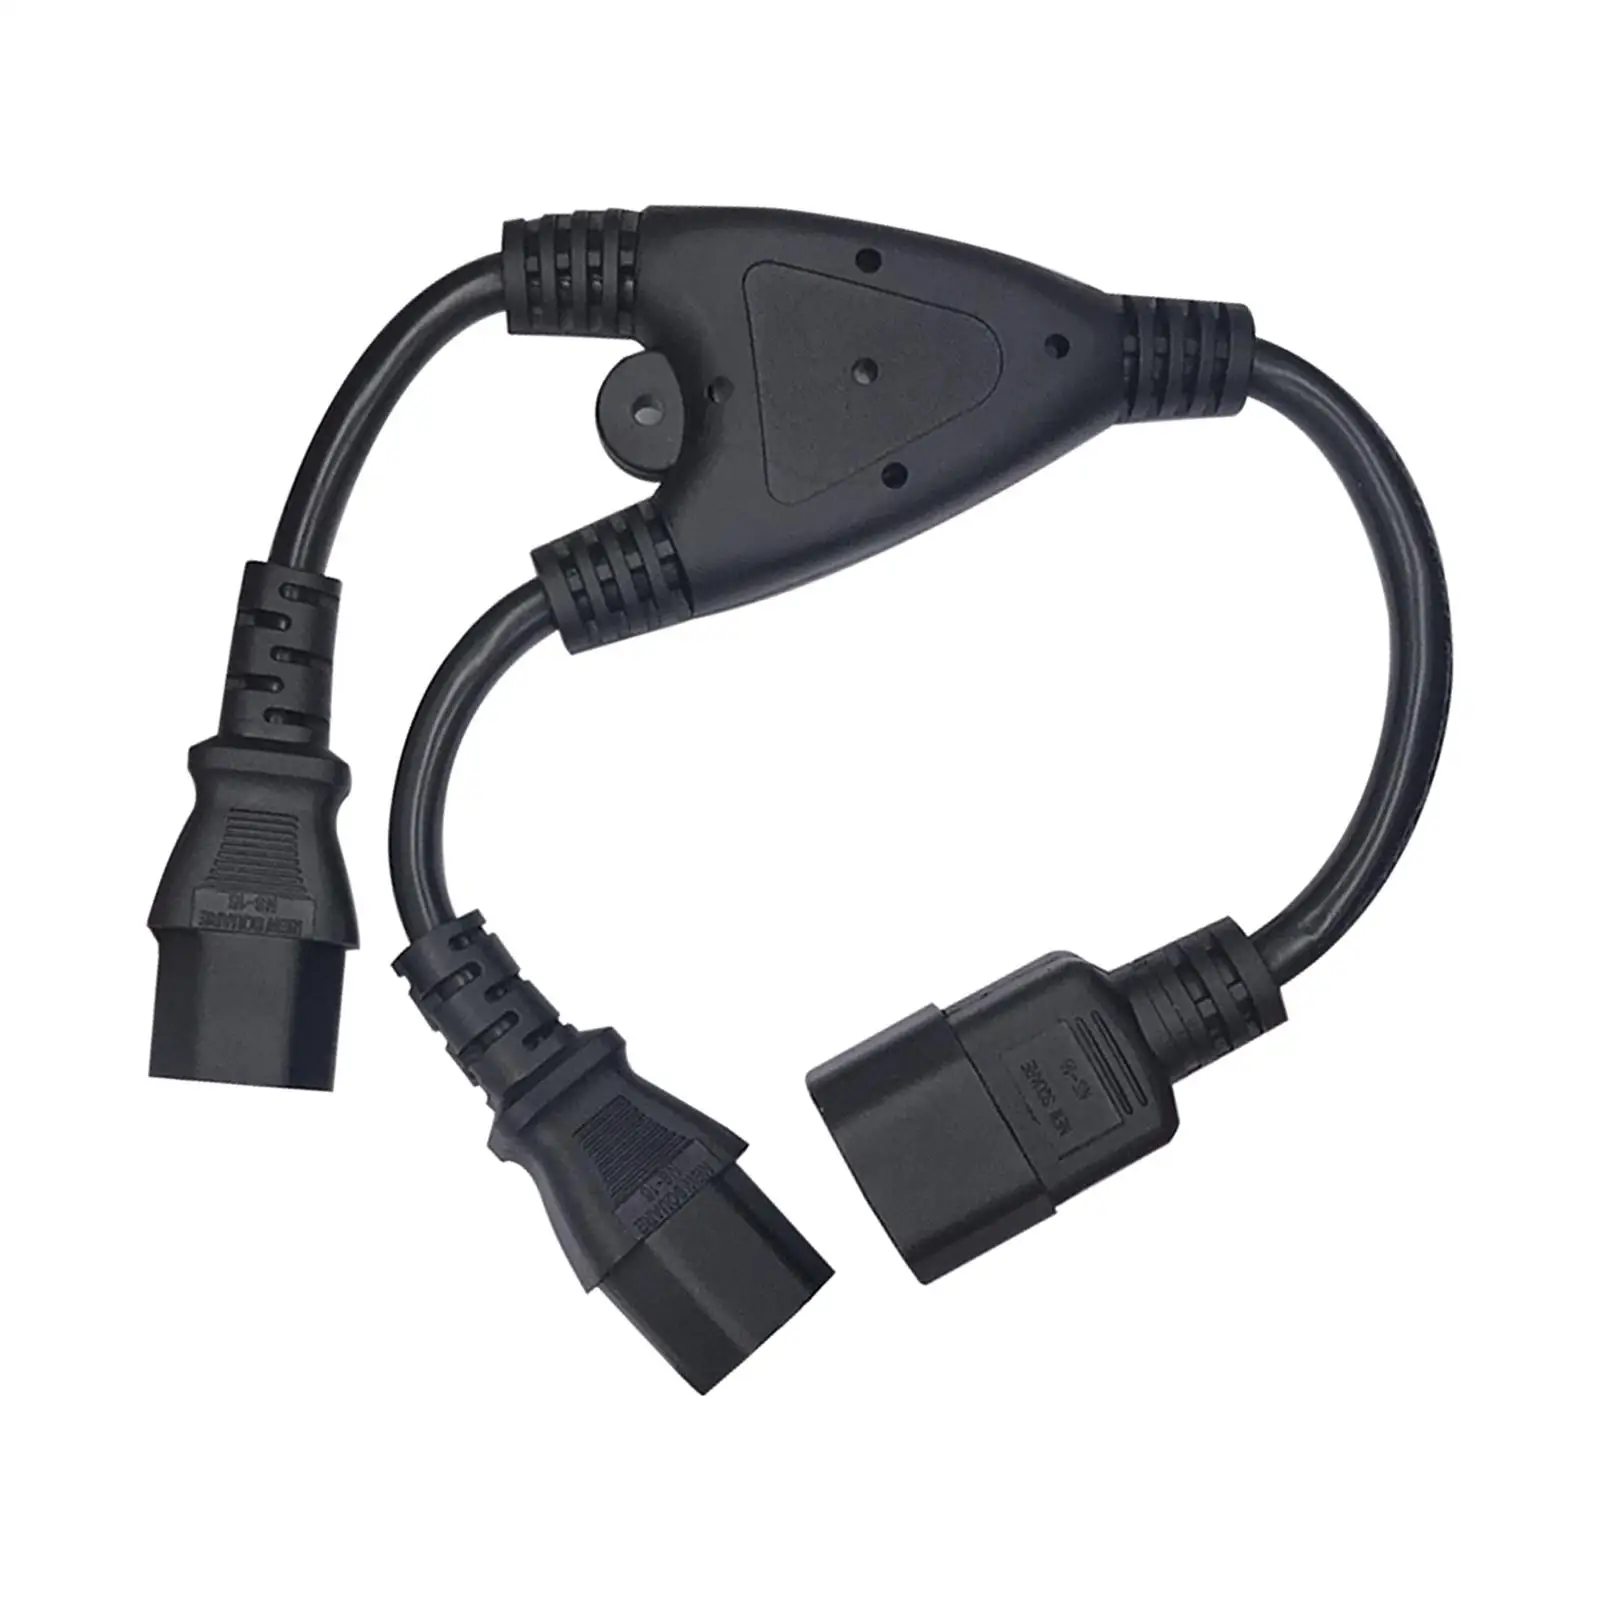 Ups Server Y Splitter C14 to 2 C13 Extension Cable 10A 2500W 0.3M Male to Female for Scanner Pcs Monitors Printers